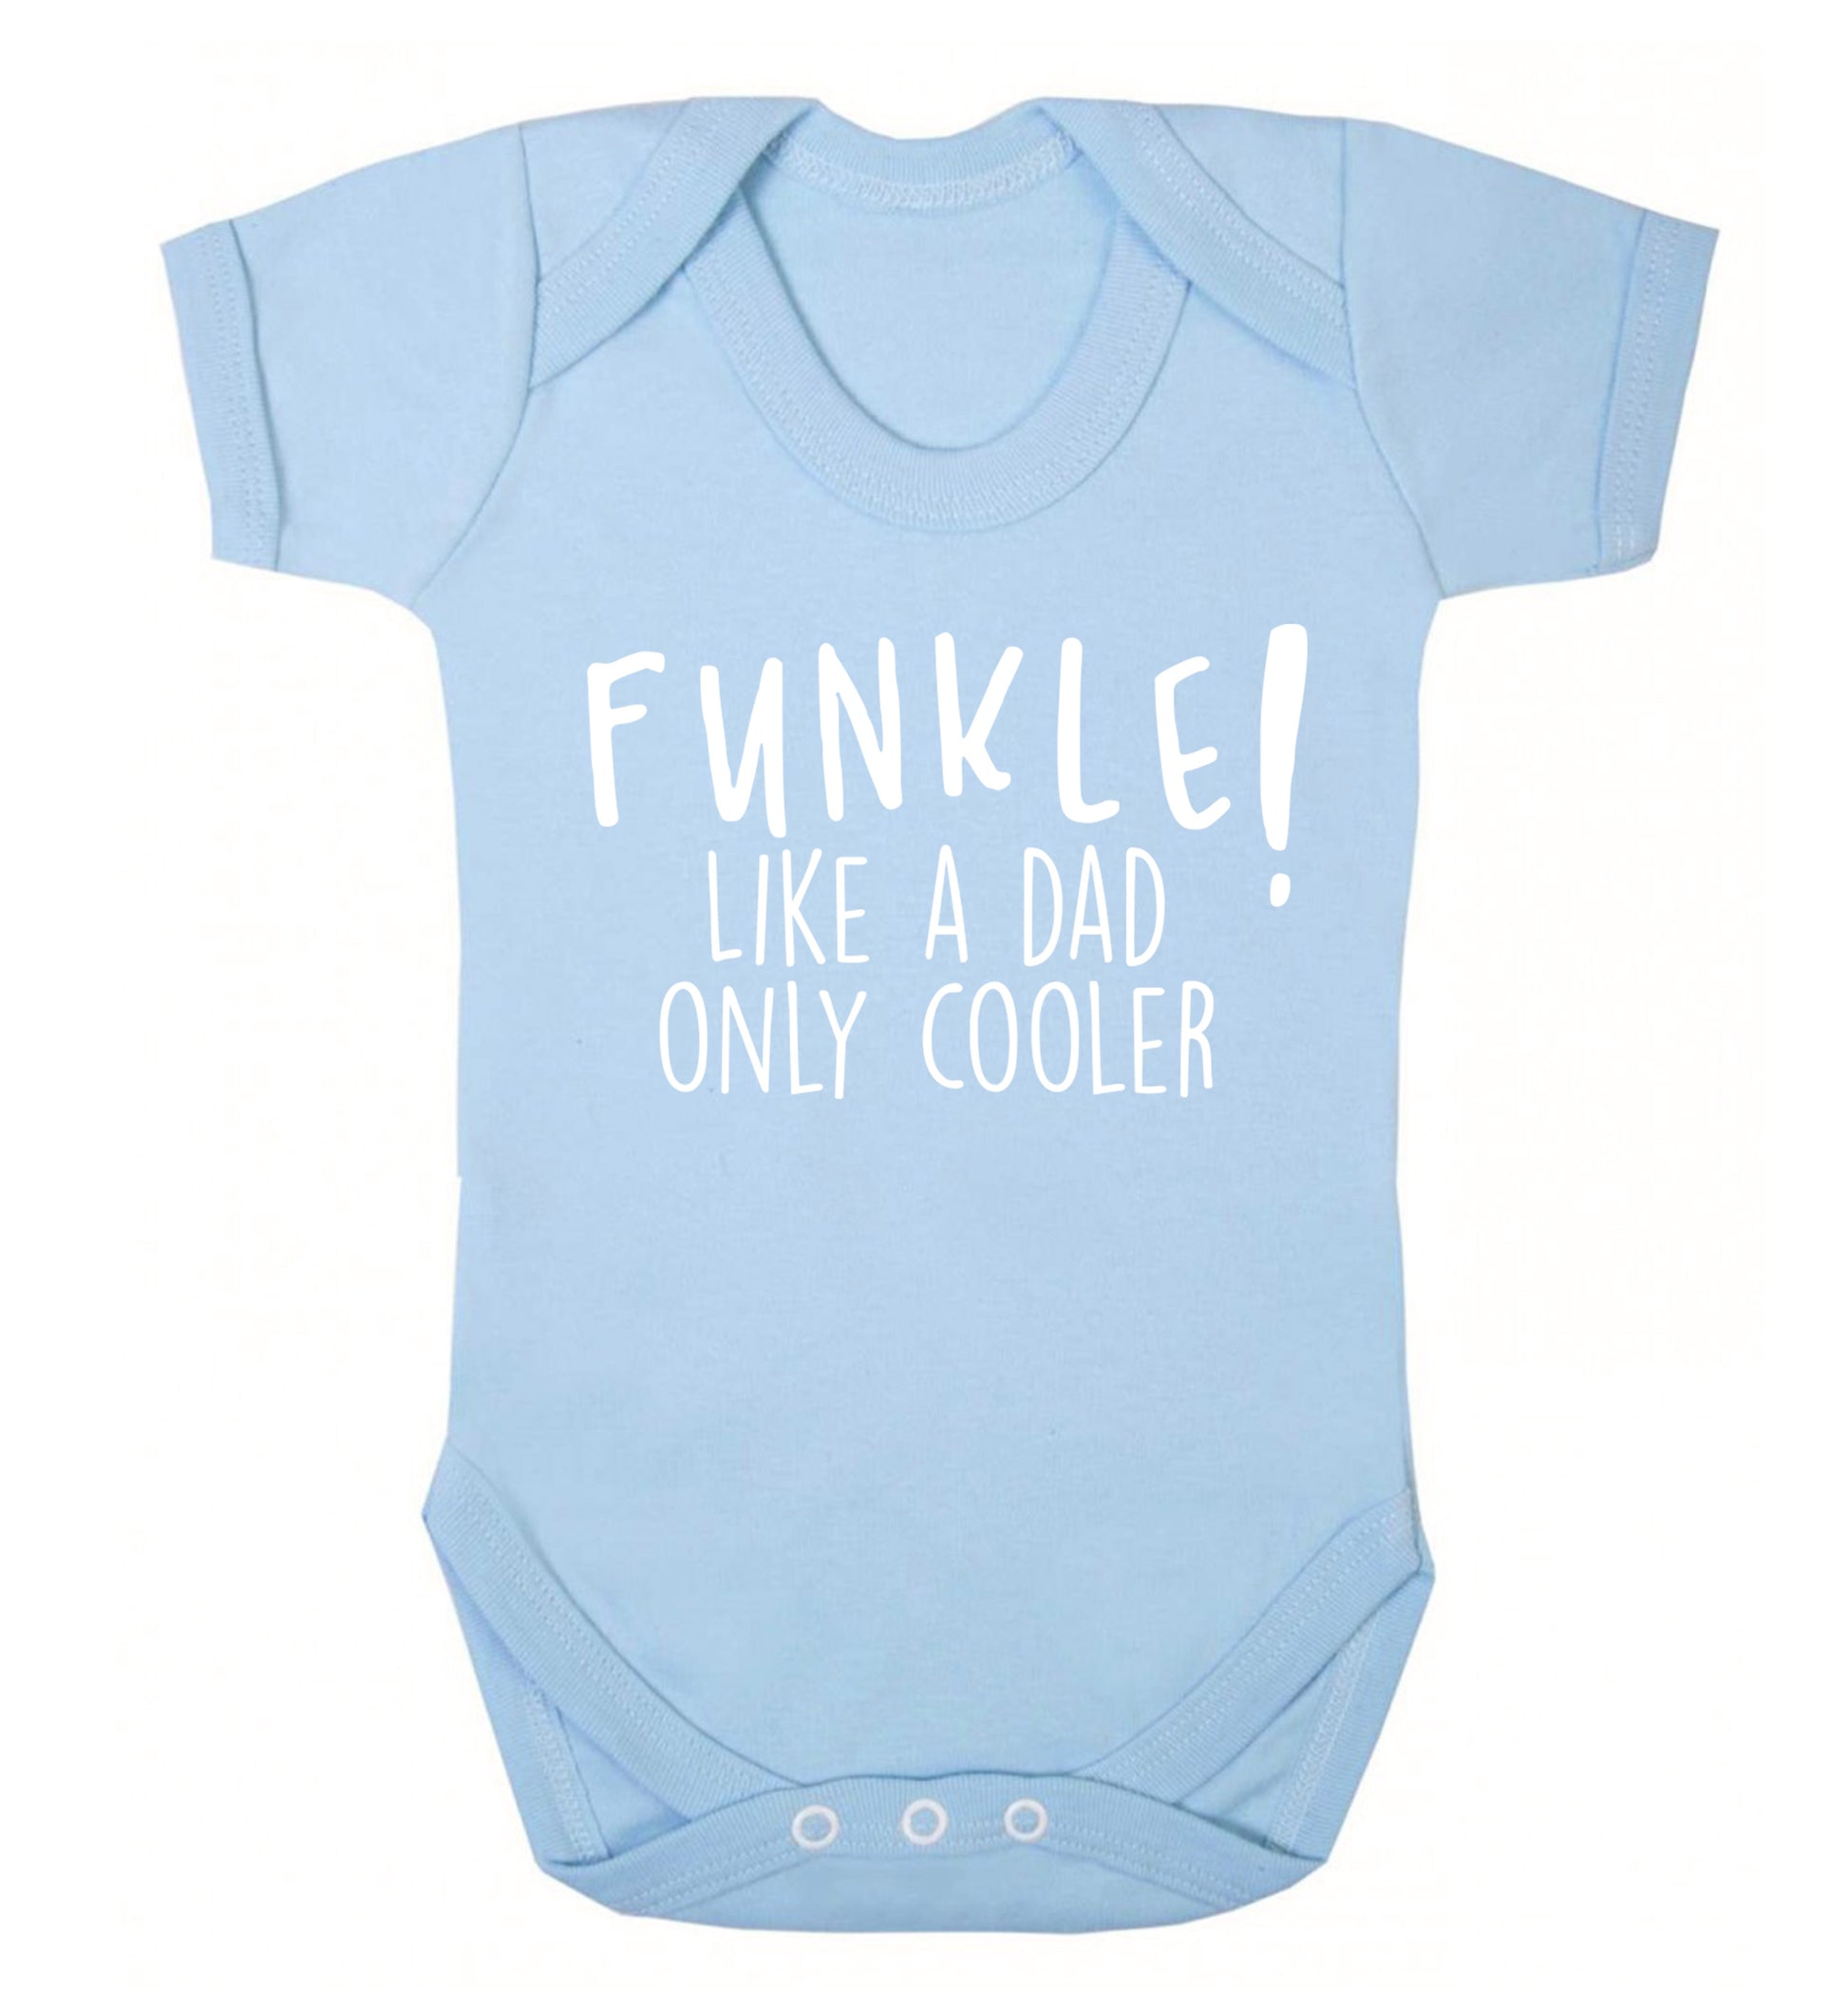 Funkle Like a Dad Only Cooler Baby Vest pale blue 18-24 months